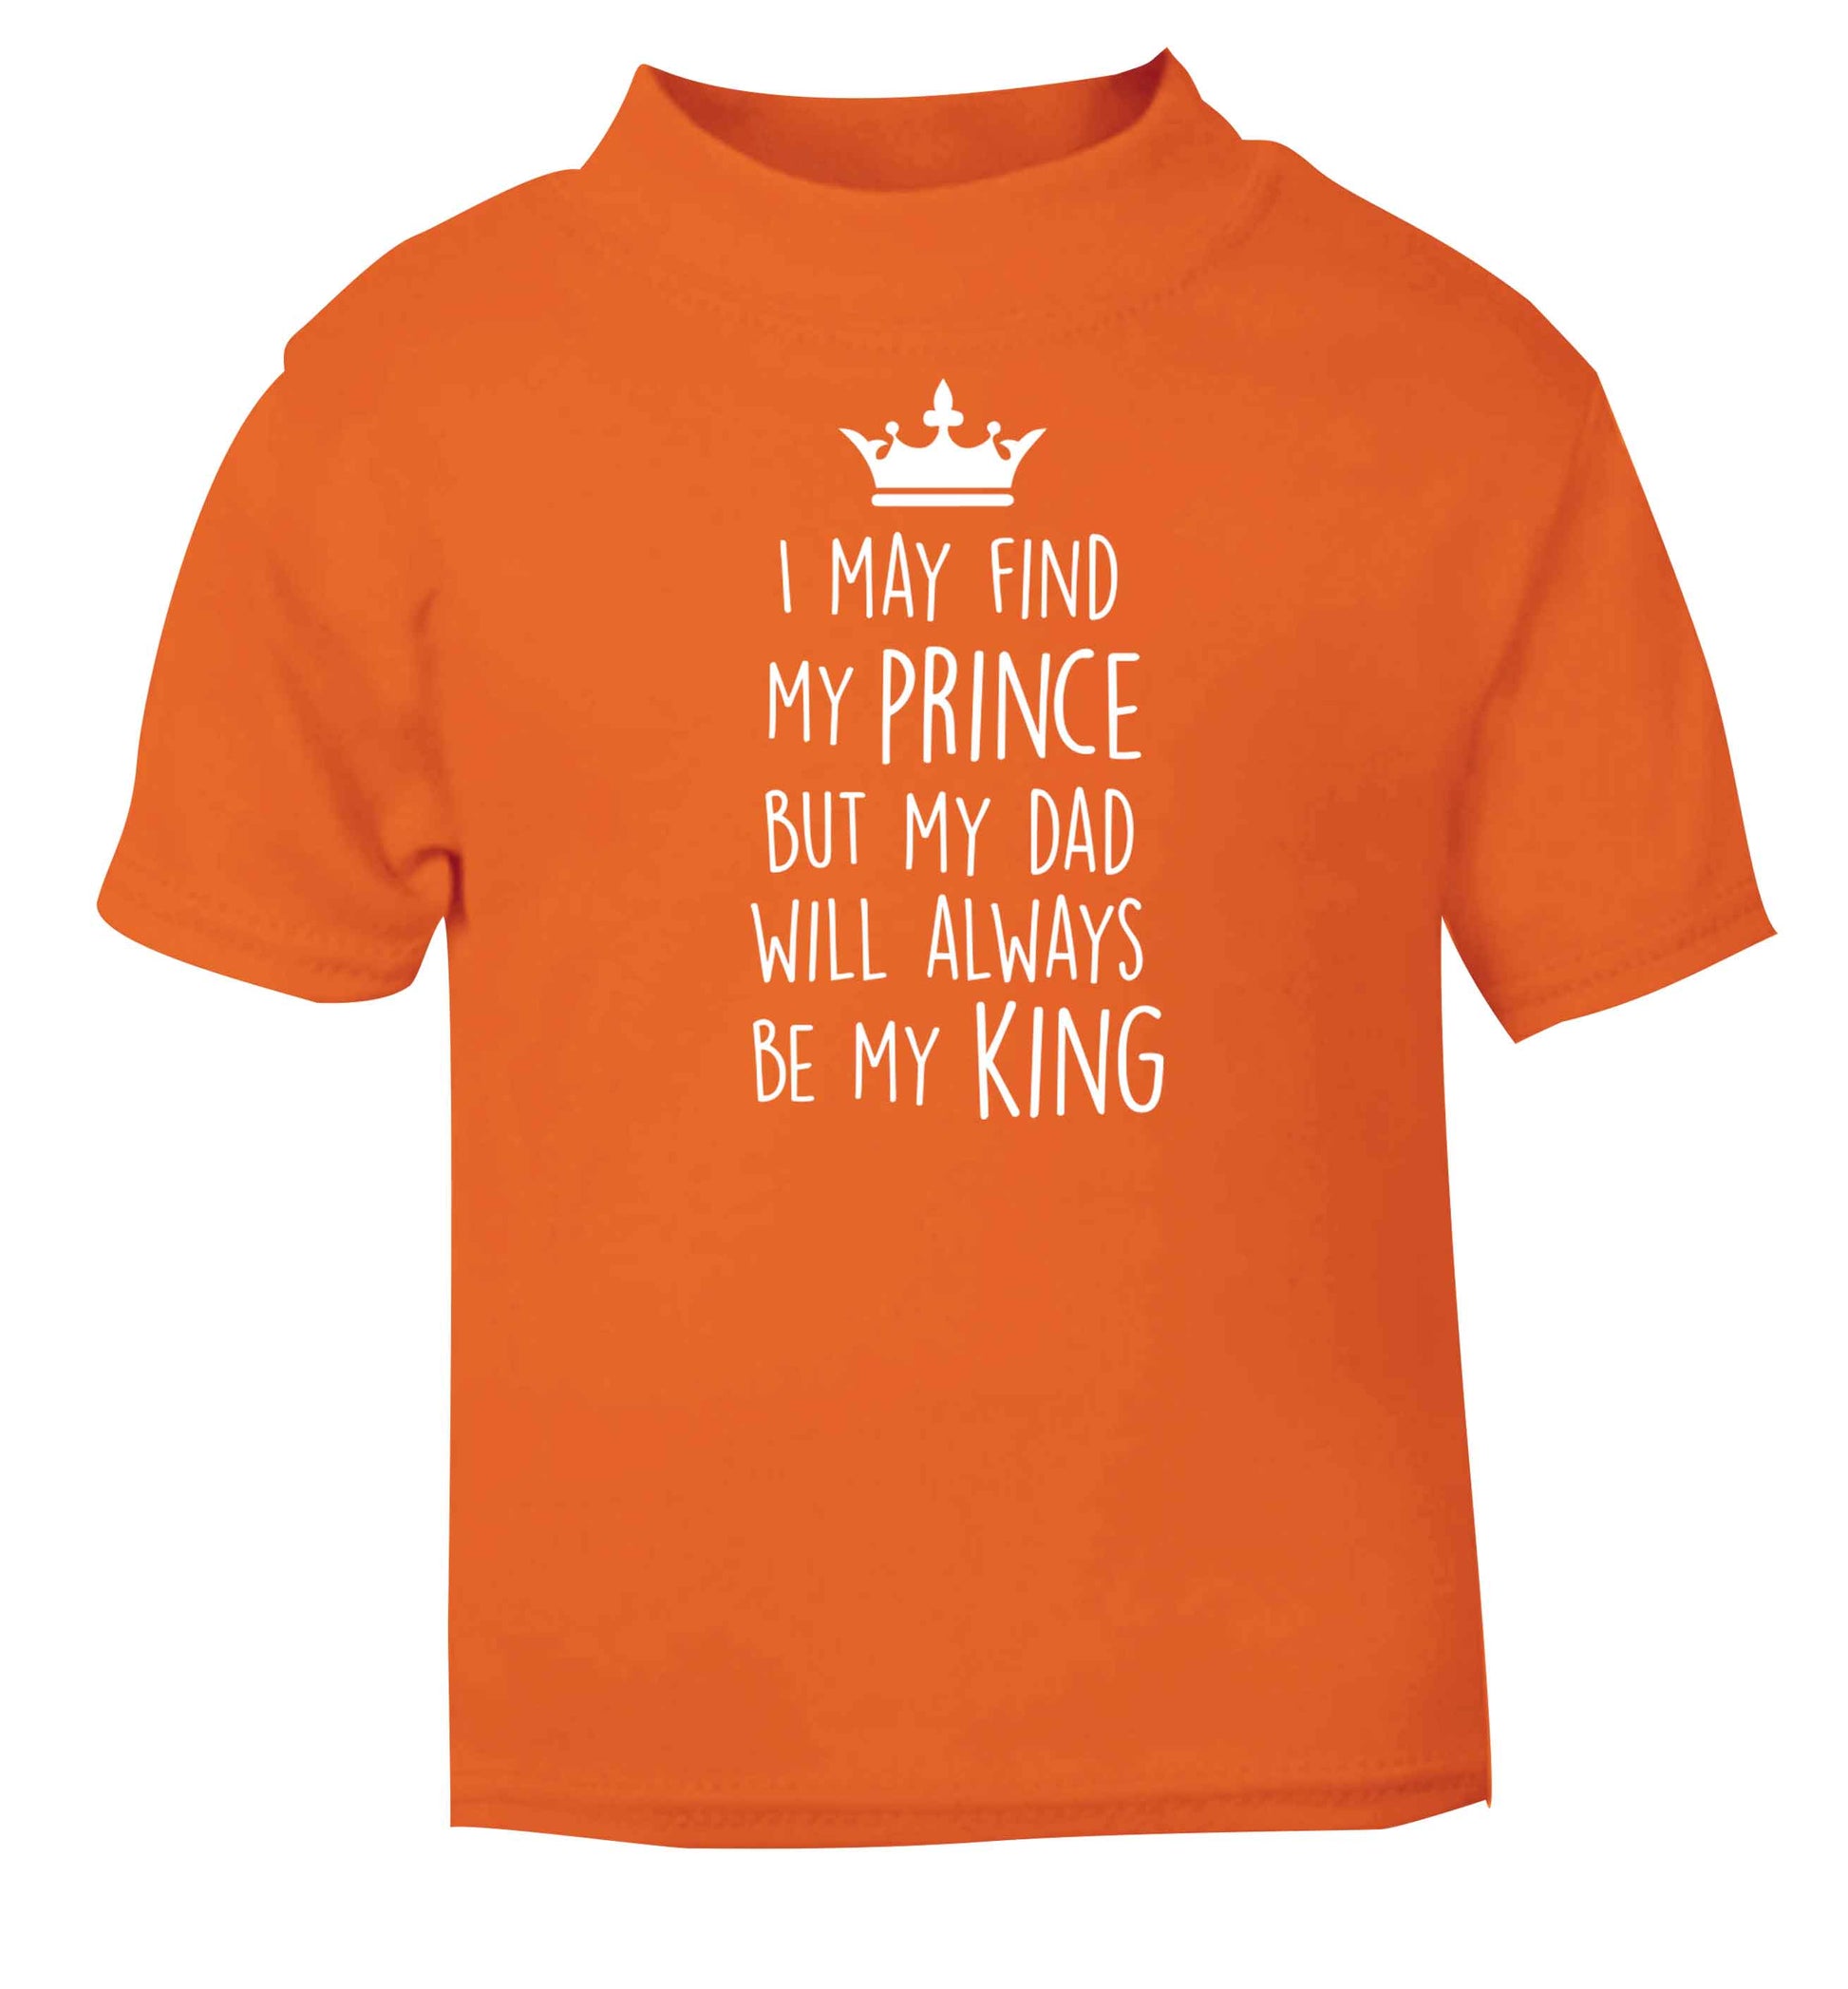 I may find my prince but my dad will always be my king orange baby toddler Tshirt 2 Years